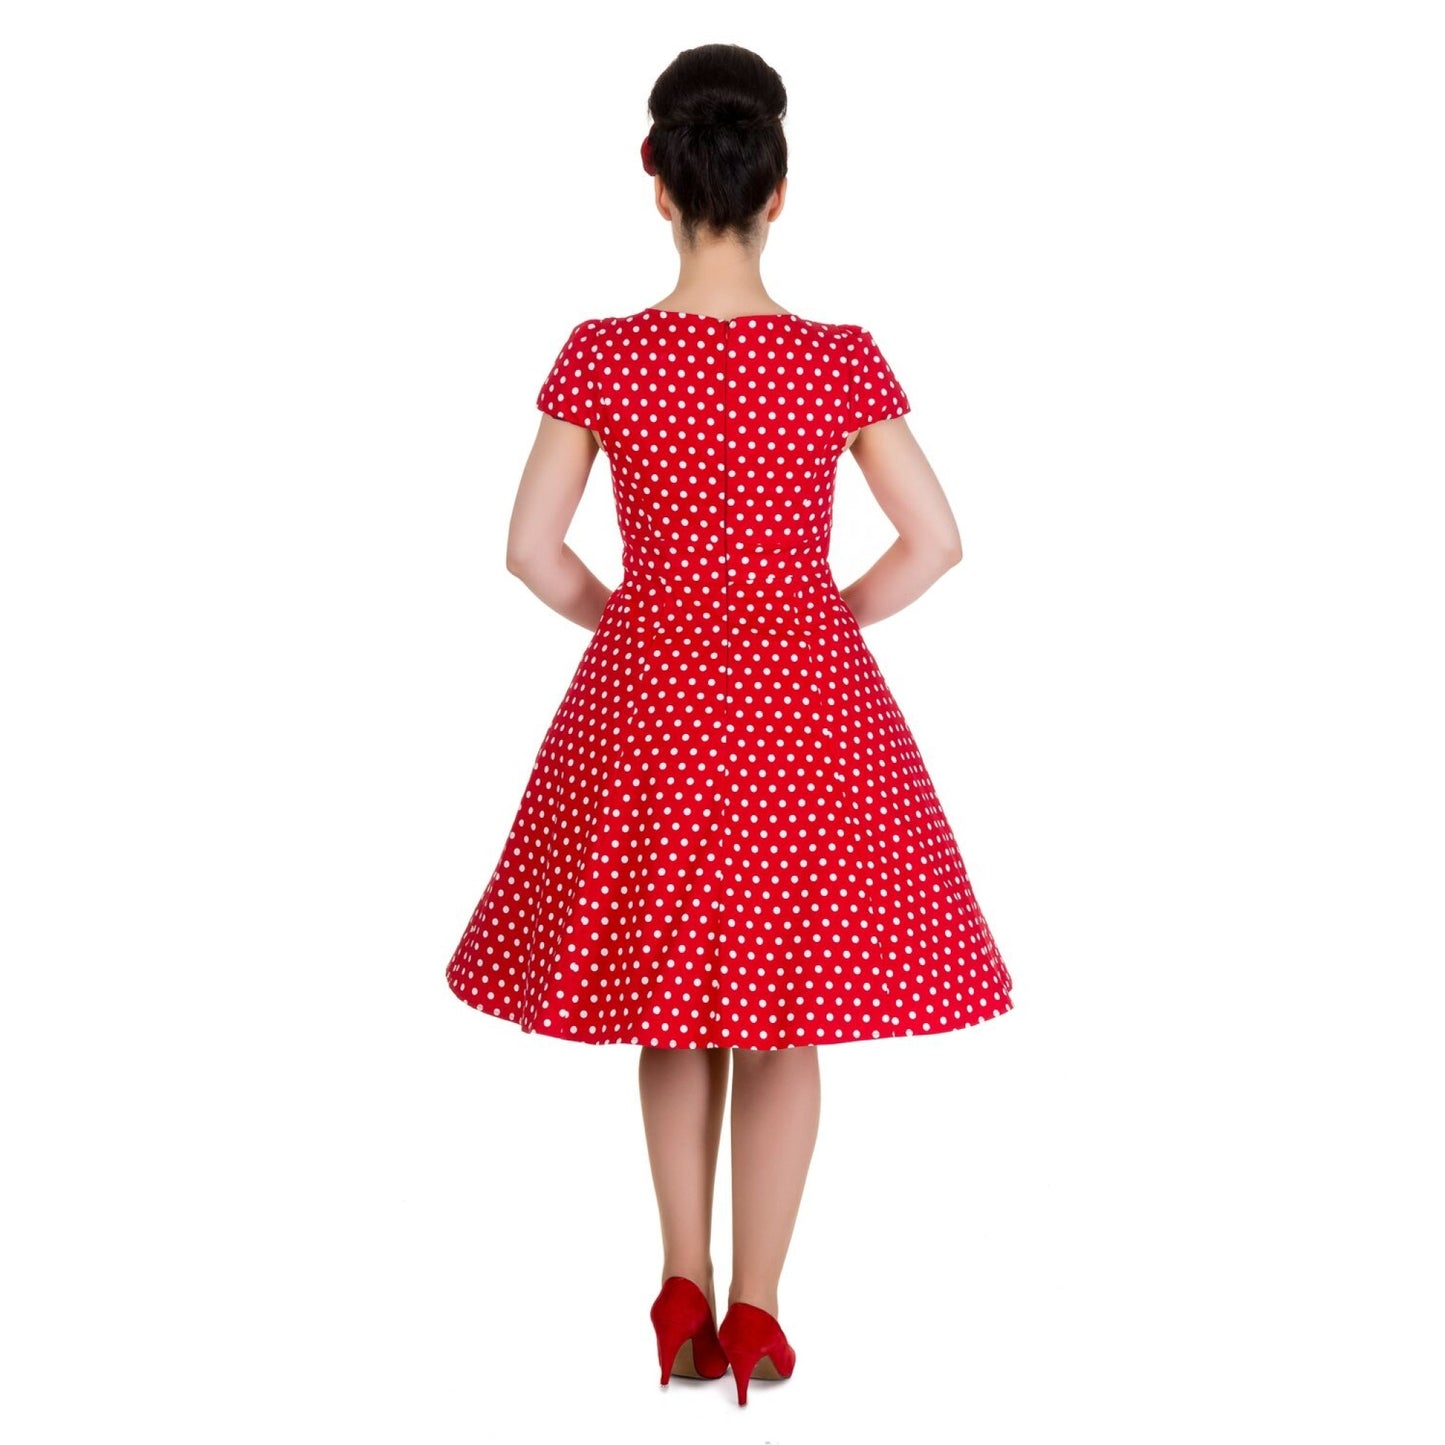 Claudia 50s Style Red and White Polka Swing Dress by Dolly & Dotty